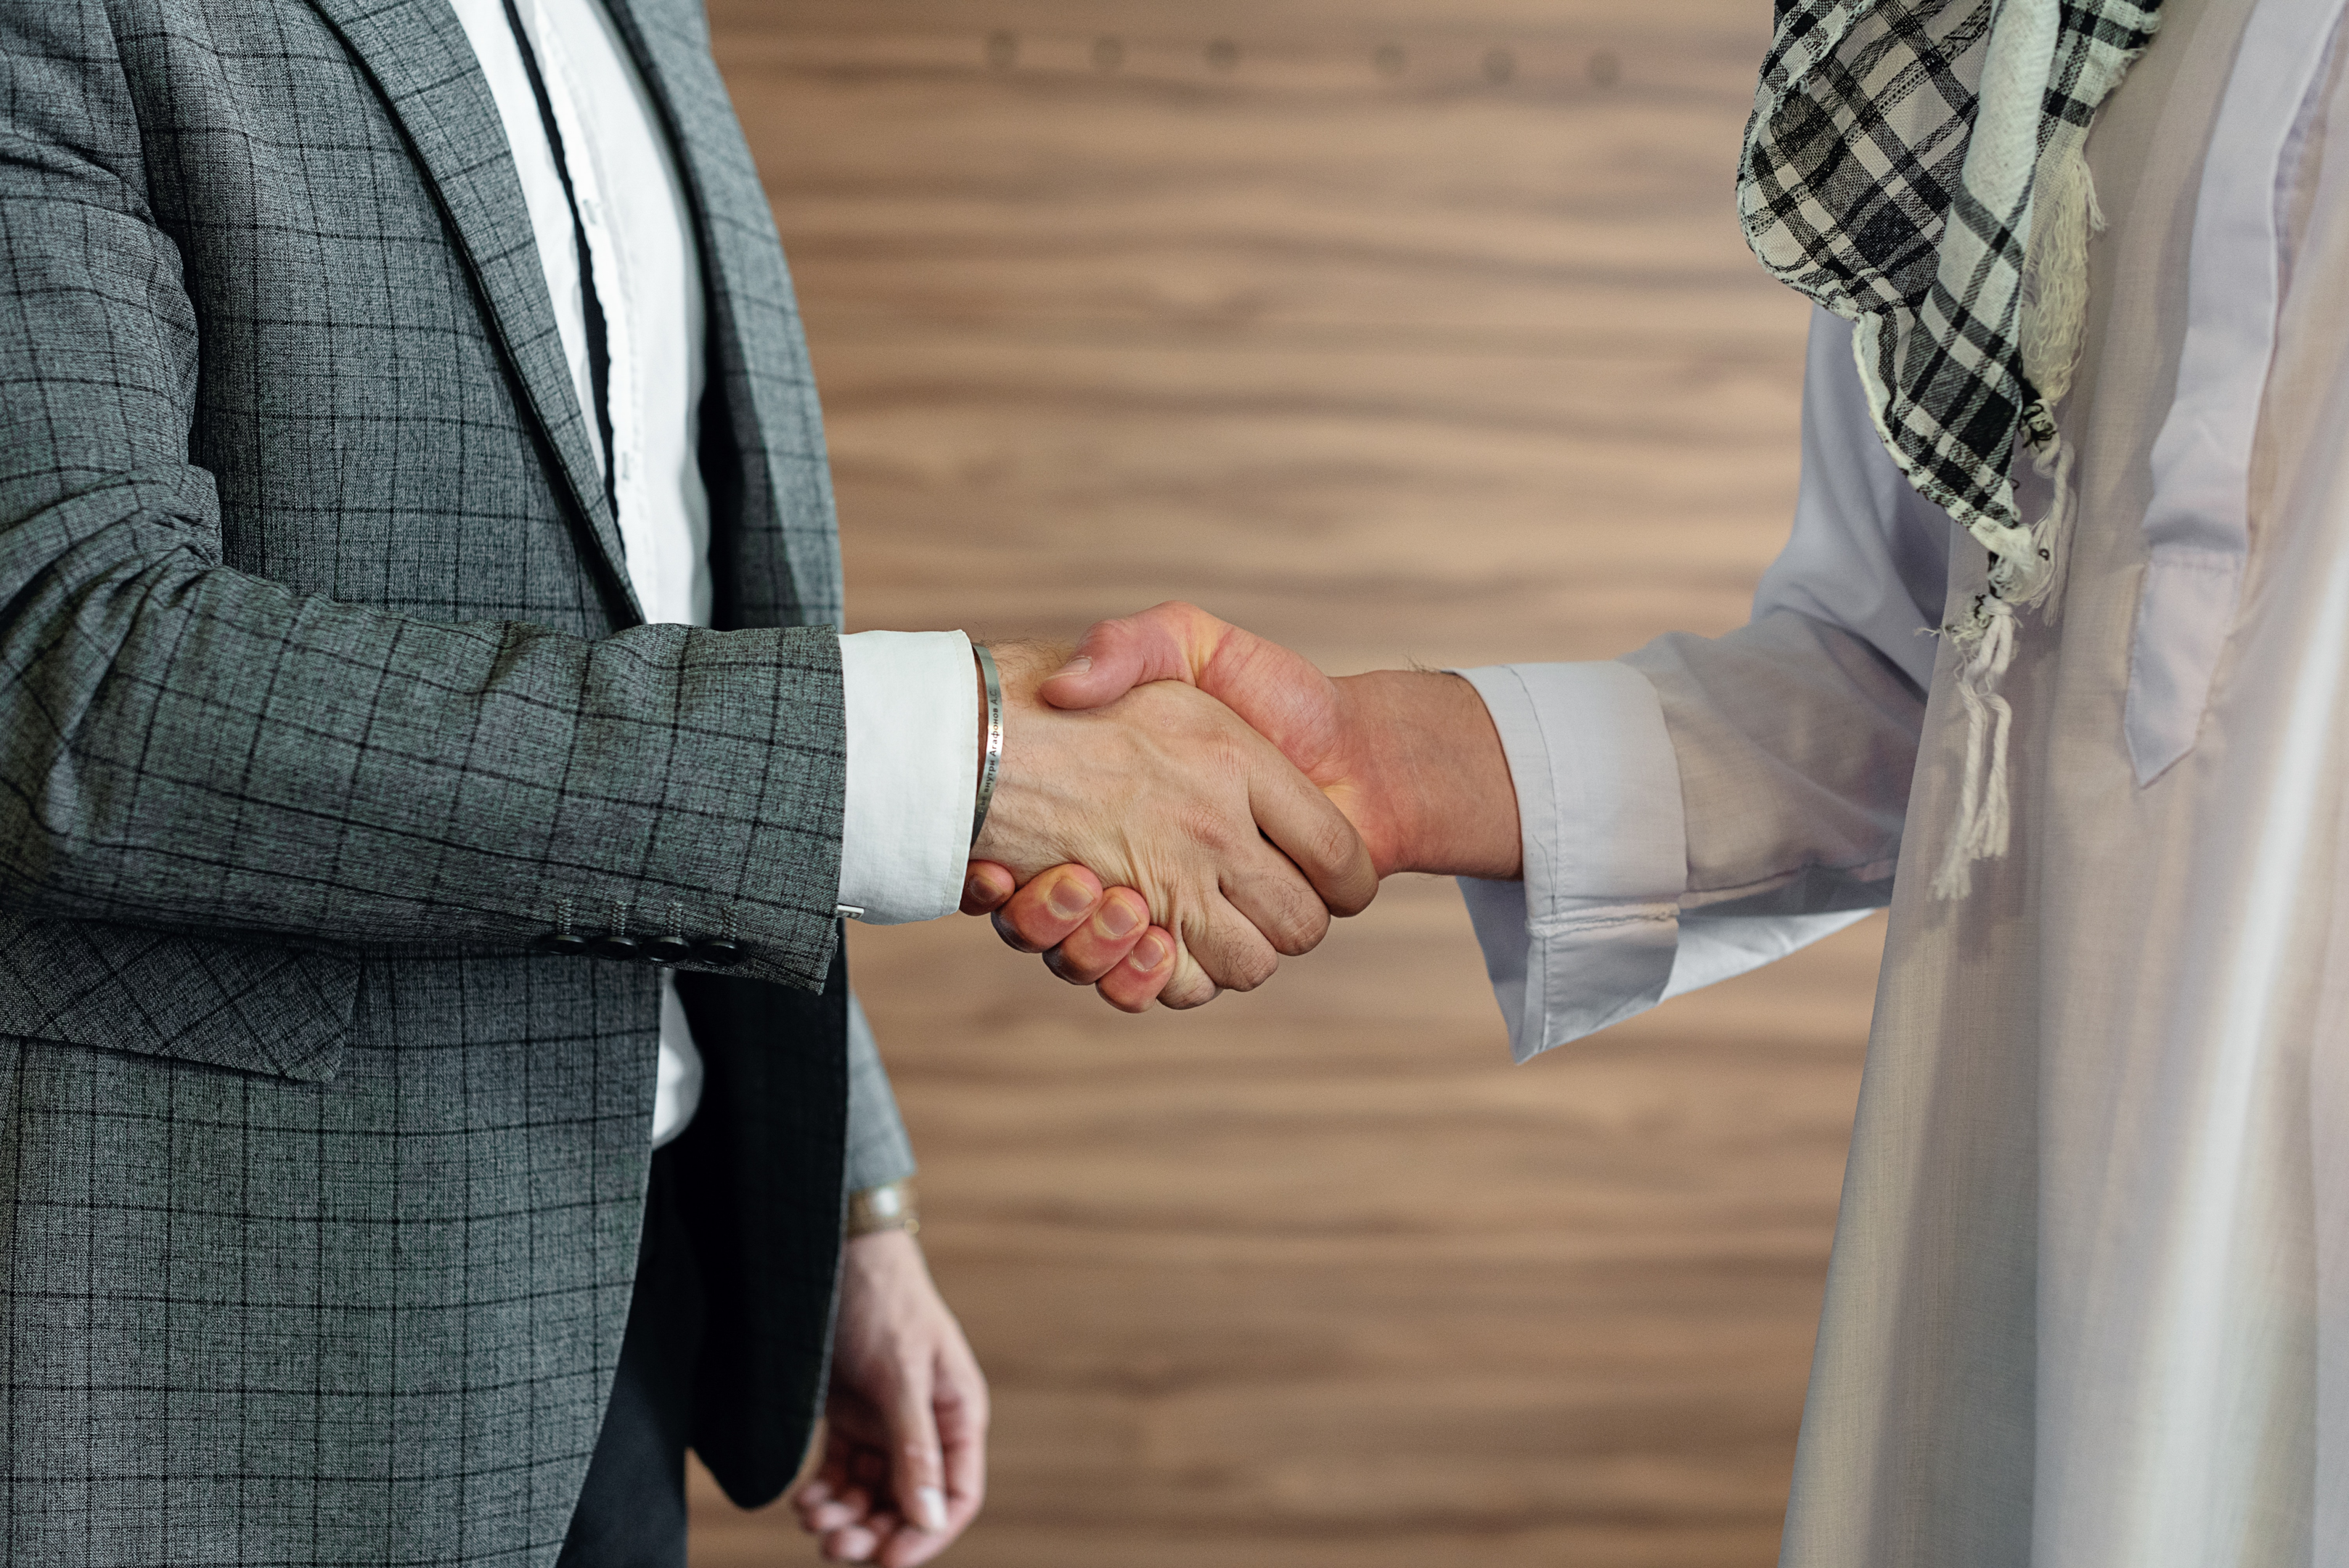 Any business can enter into a joint venture business partnership agreement. They can choose whether to remain a contractual relationship or establish a separate legal entity.